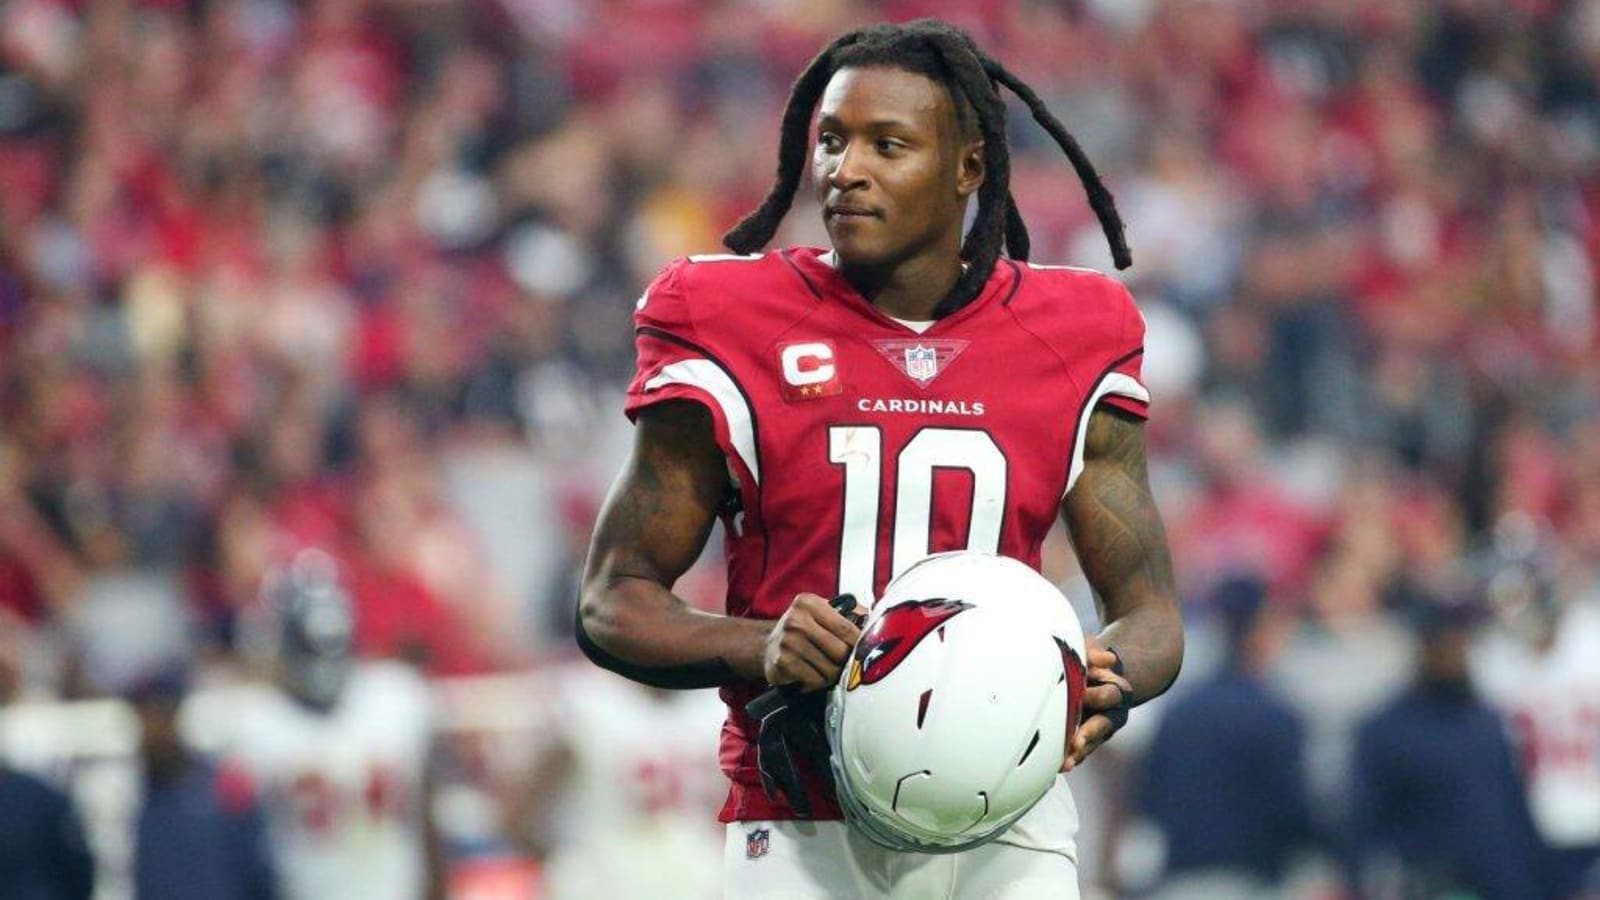 Ravens may have ruined Chiefs chances to land DeAndre Hopkins